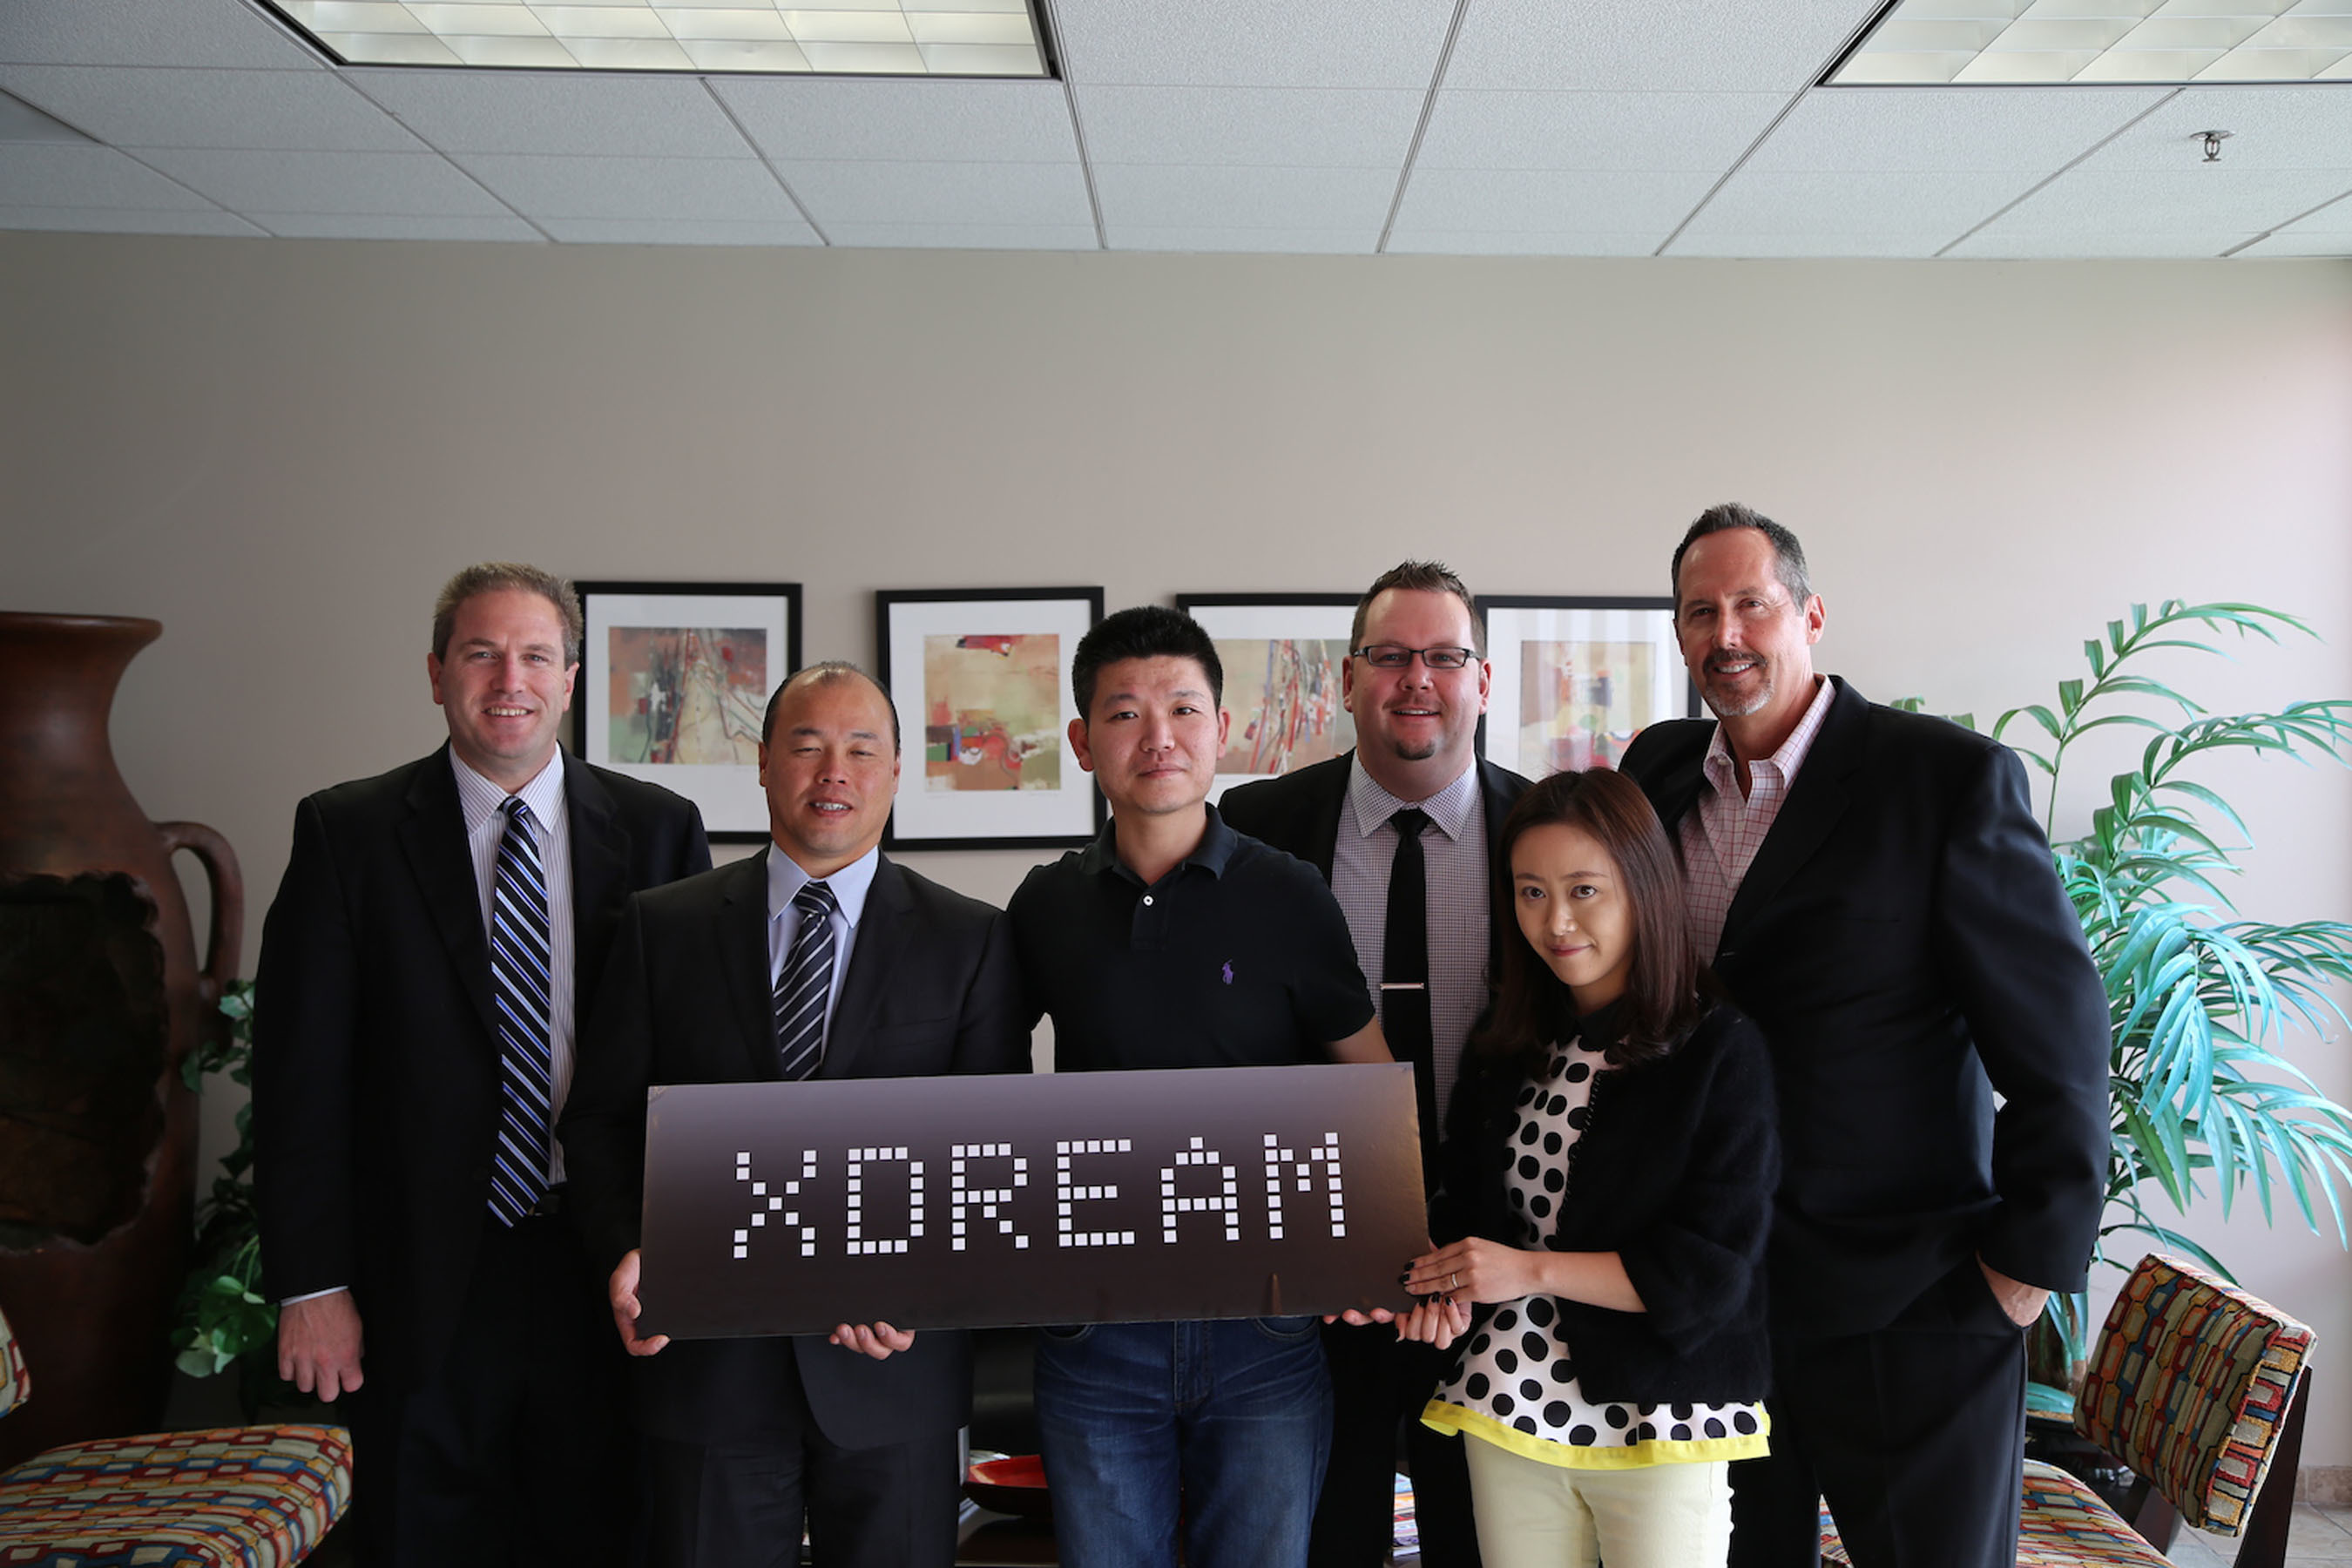 LifeTech Brands and Famous Works Electronics sign an exclusive agreement to distribute XDREAM branded products in North America (LifeTech Brands: Tom Ling – President, Tom Amon – VP of Sales & Marketing, Peter Norton – VP Operations and Ken Colby – Director of Sales & Marketing. Famous Works Electronics: Joy Choi – CEO/President, Vivian Gong – Sales Director) (PRNewsFoto/LifeTech Brands)